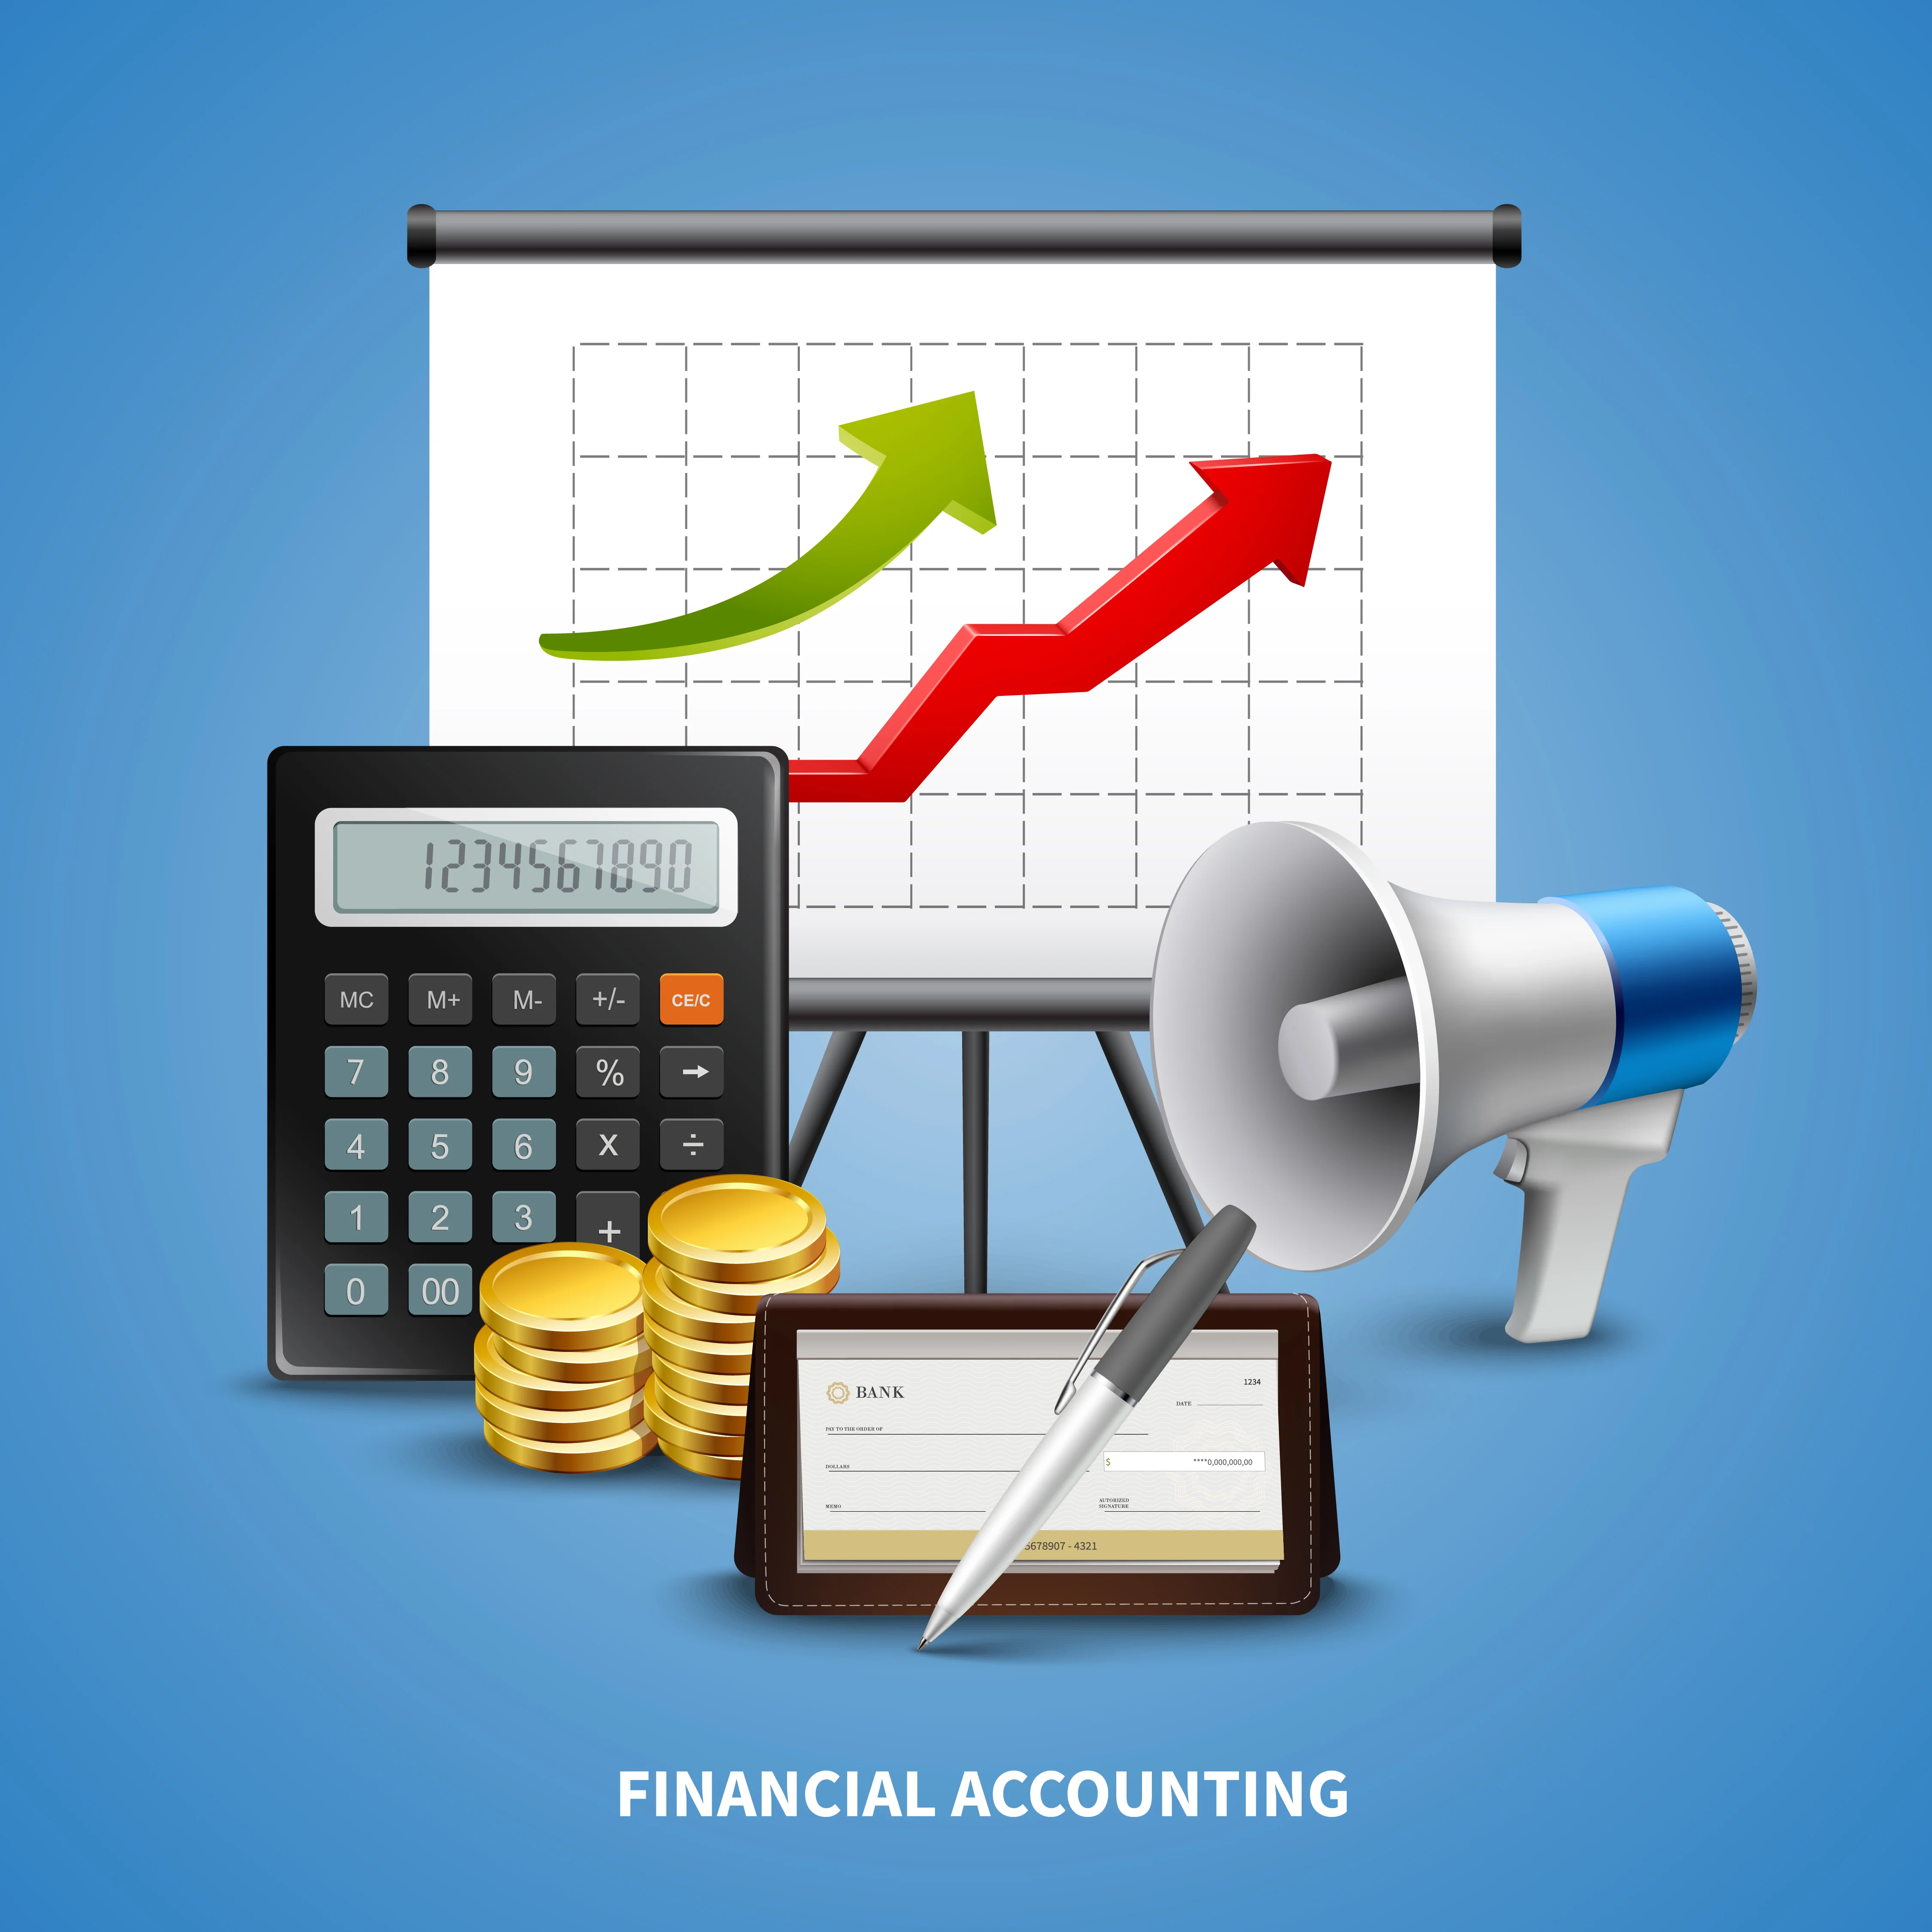 Top 10 Financial Accounting Challenges